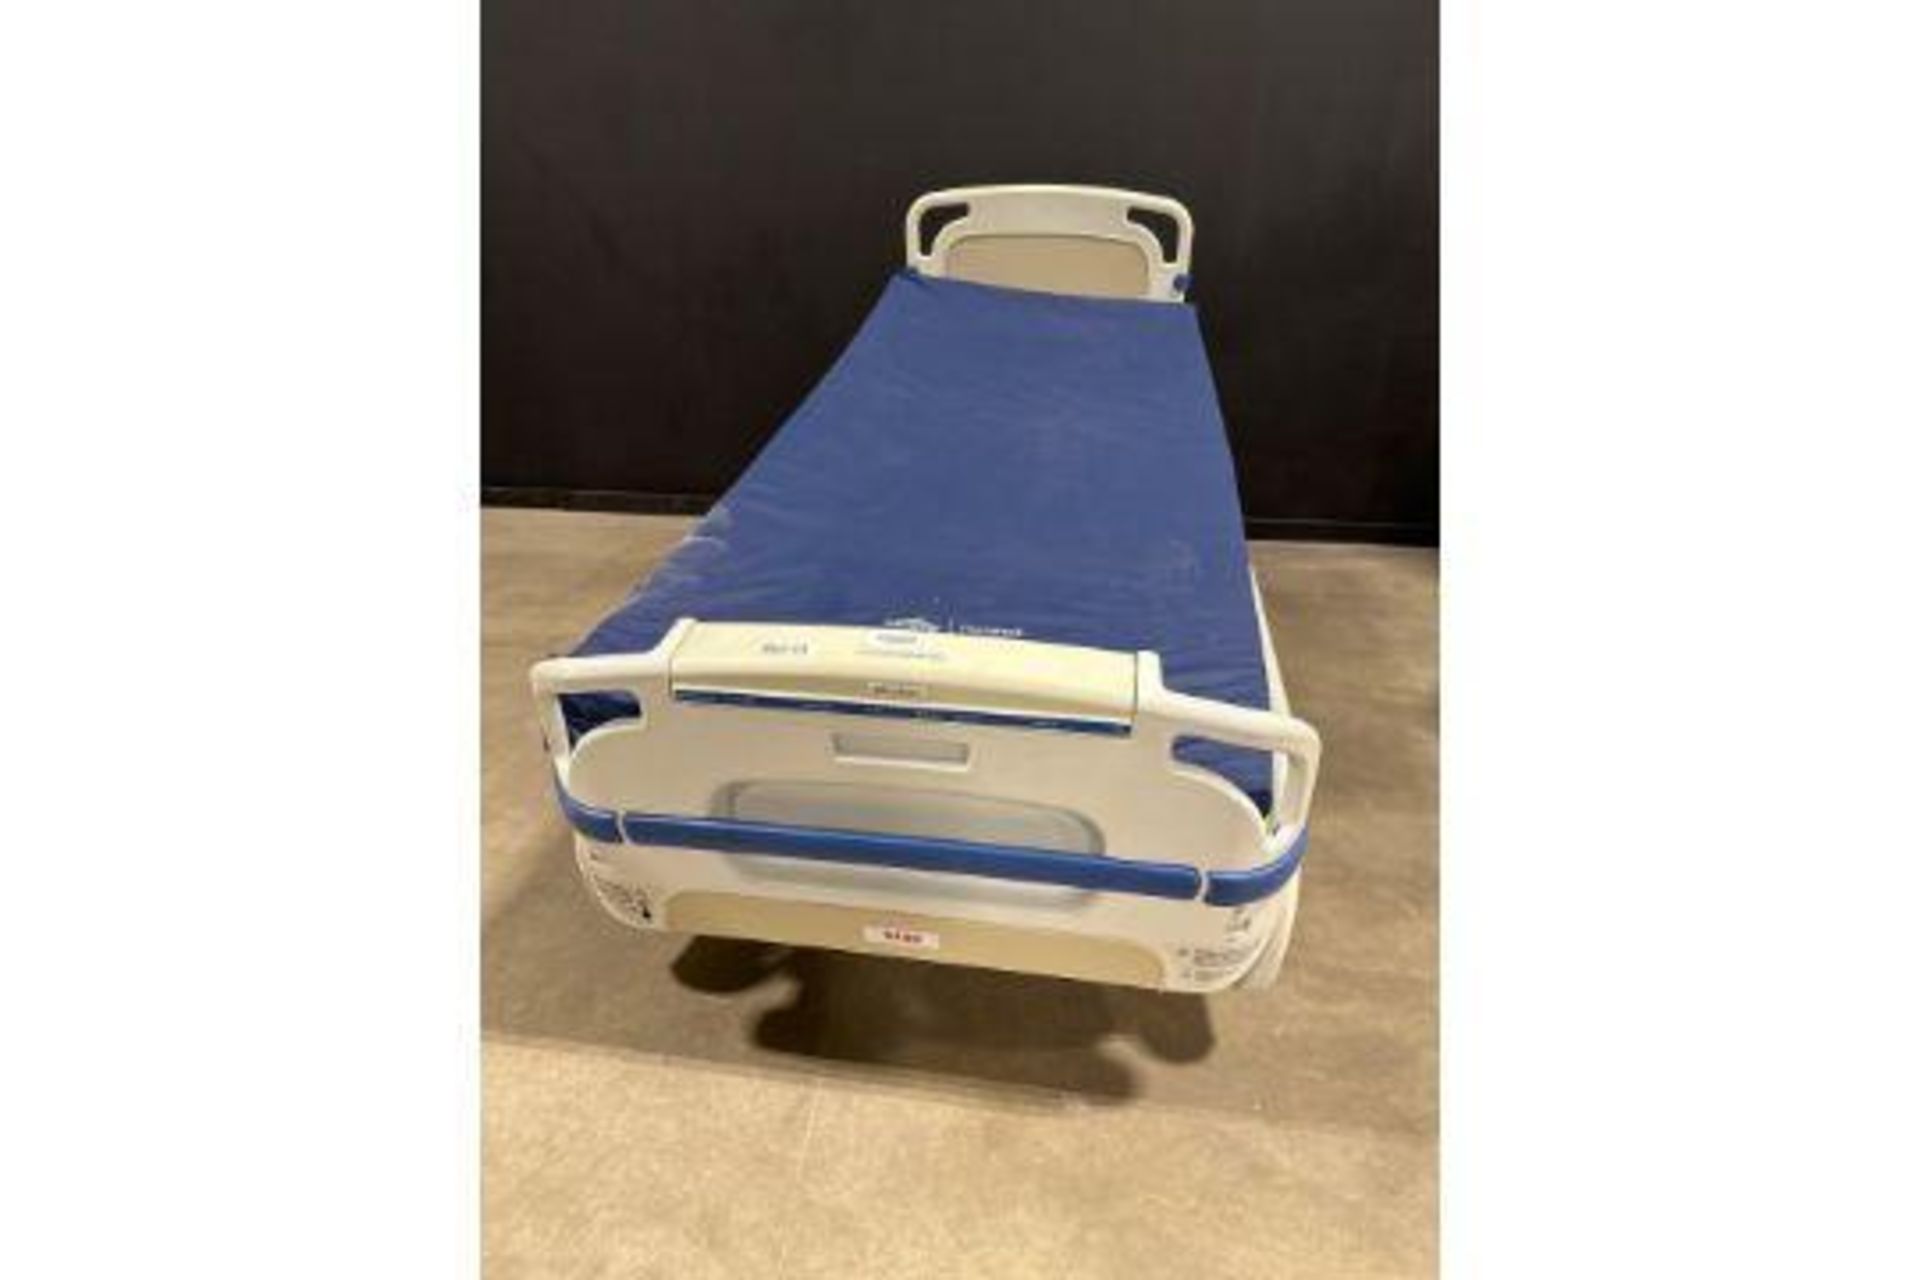 STRYKER 3002 S3 HOSPITAL BED - Image 2 of 2